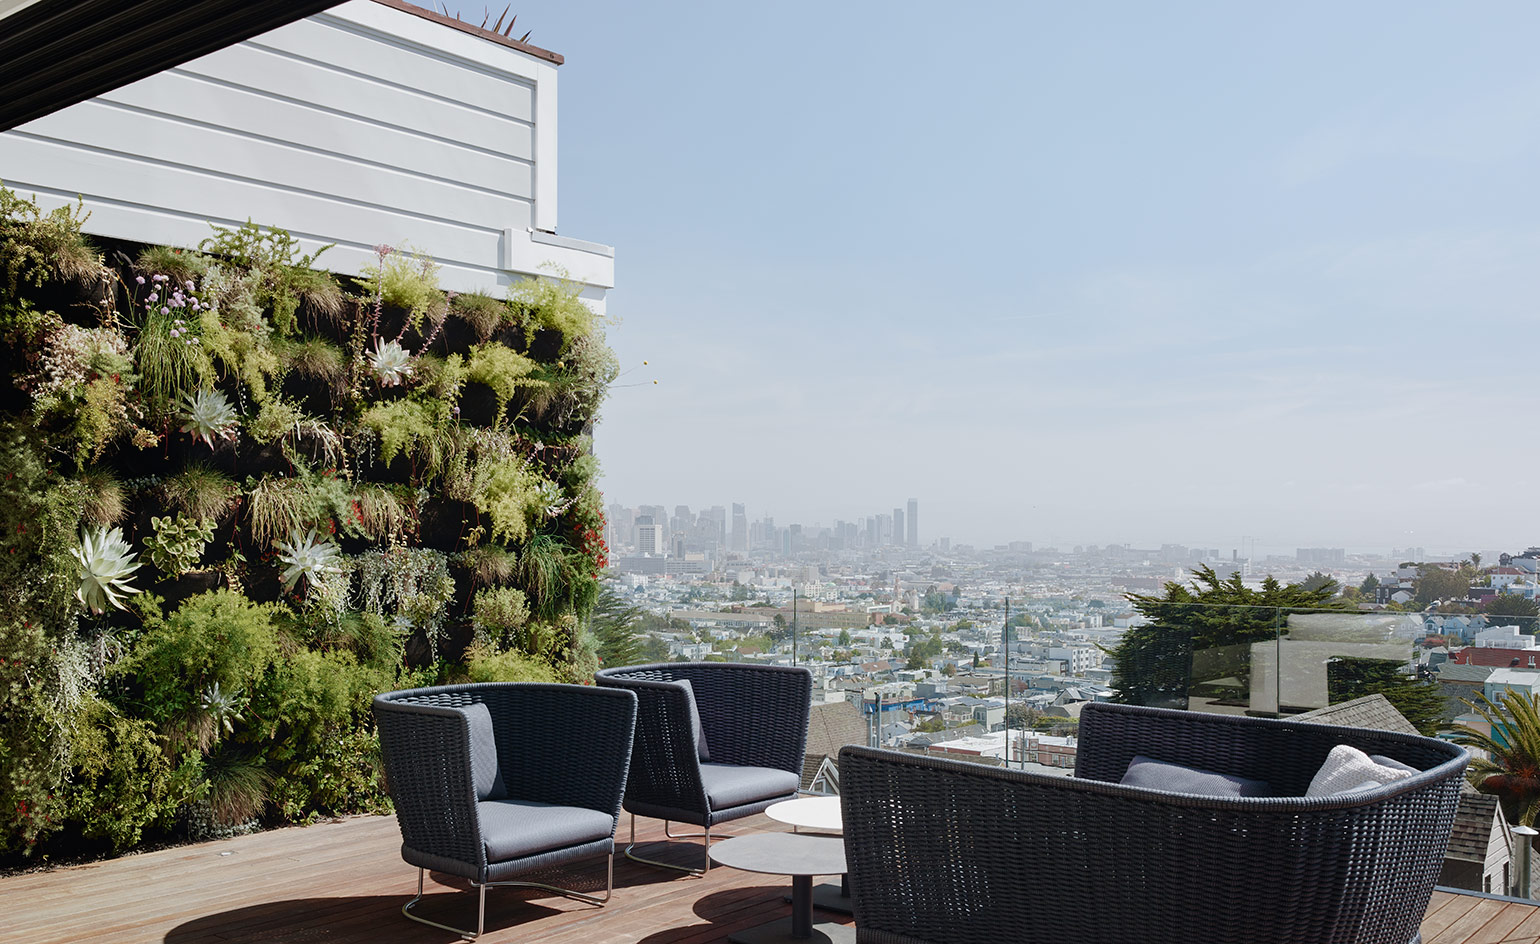 A terrace with a lush living wall overlooks San Francisco